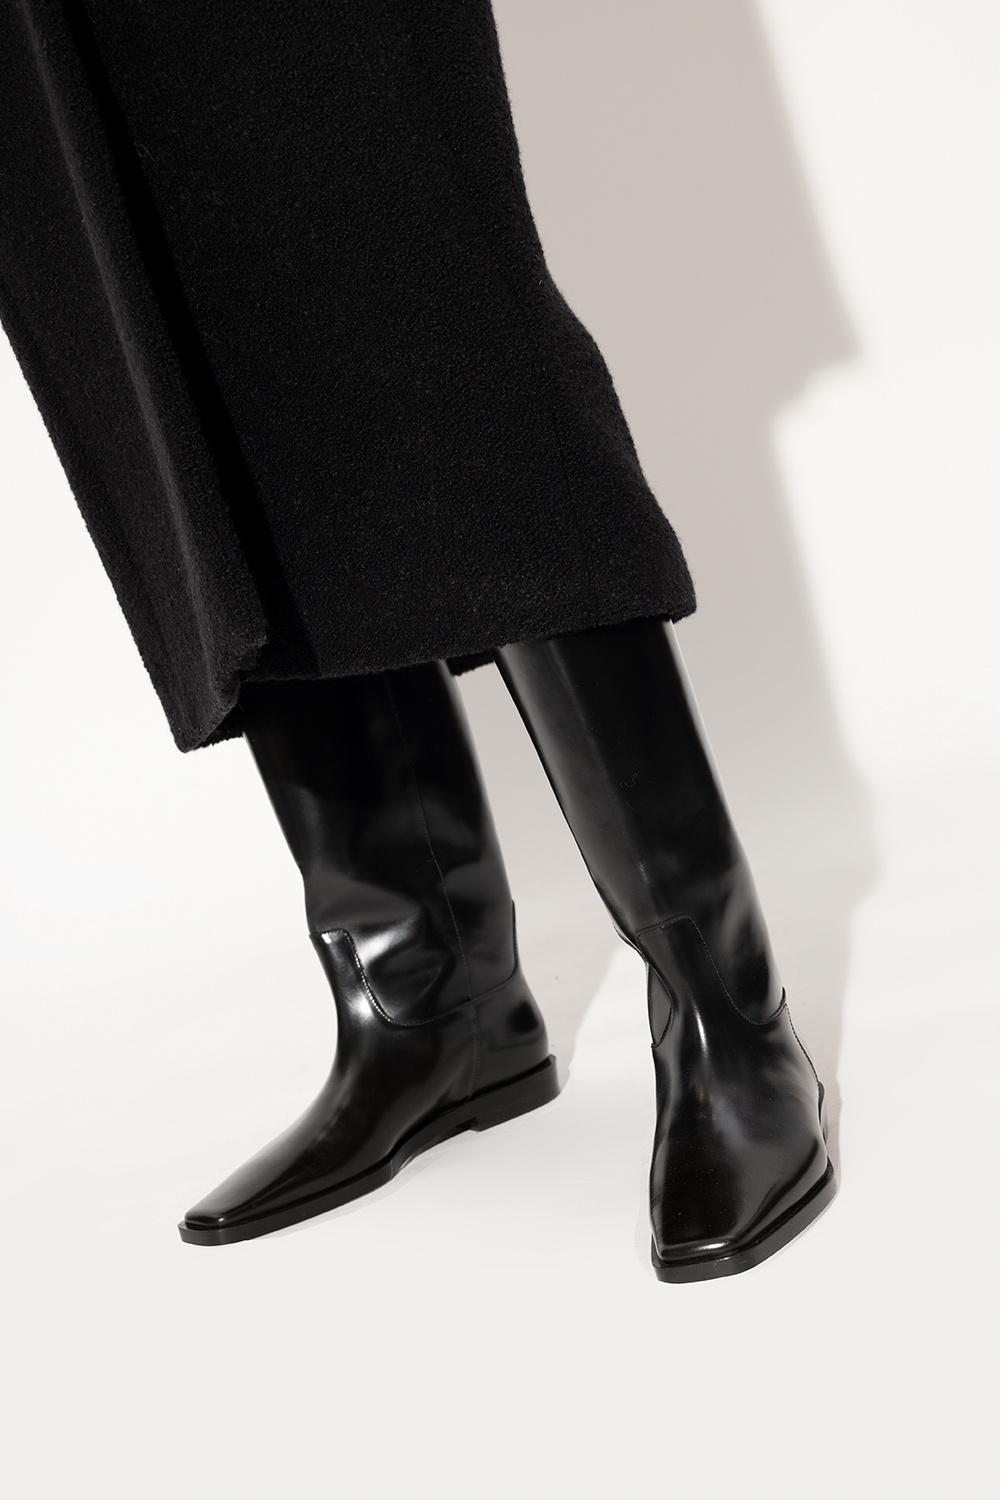 Totême 'the Riding' Boots in Black | Lyst